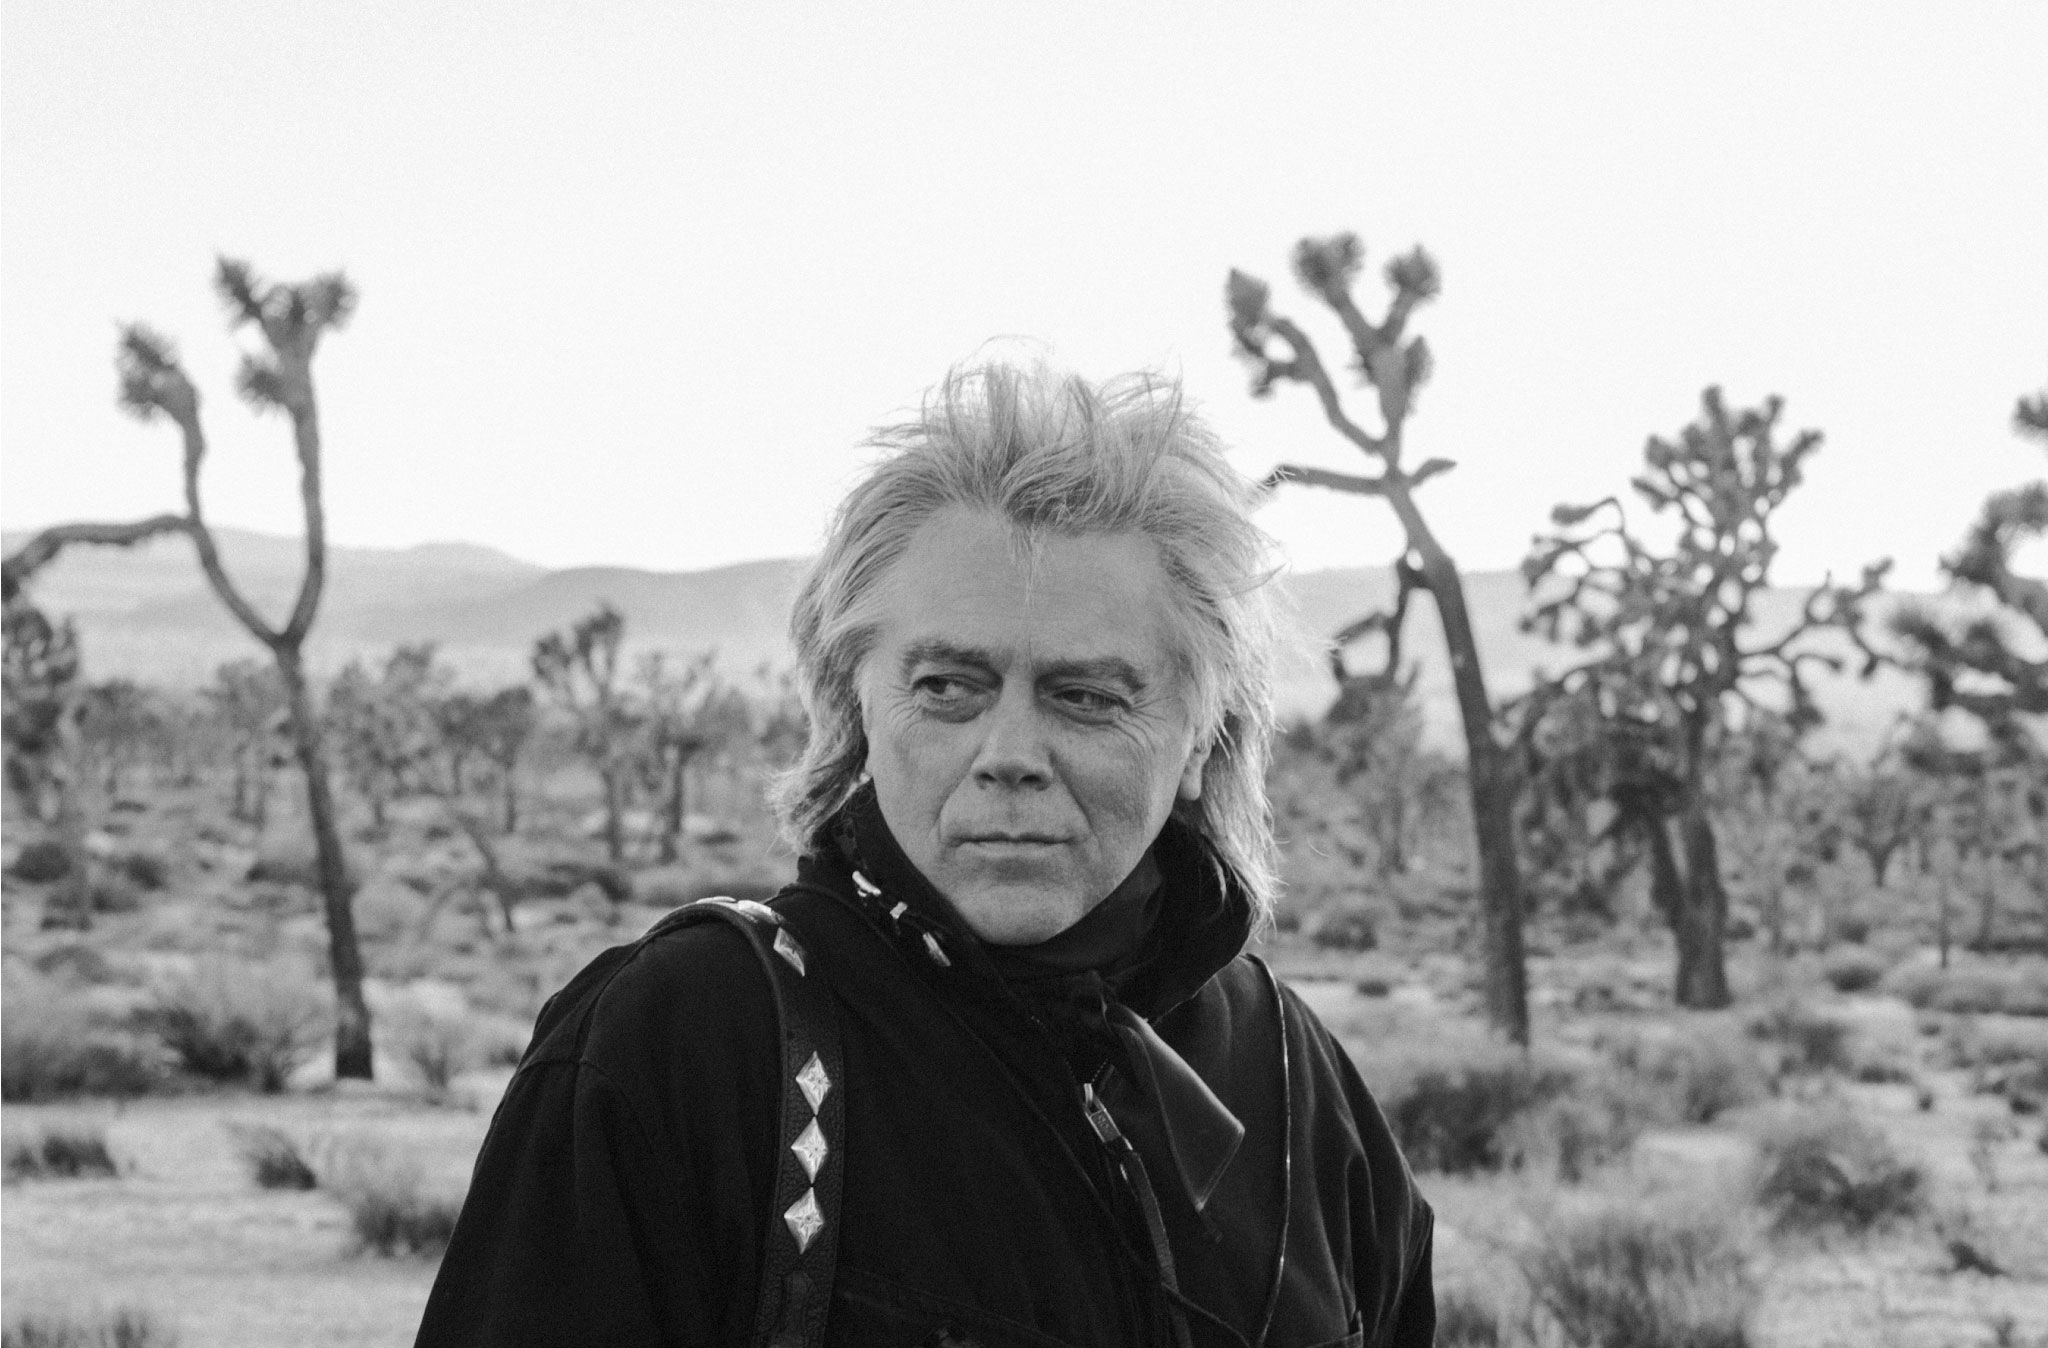 American Ballads: A Conversation with Marty Stuart